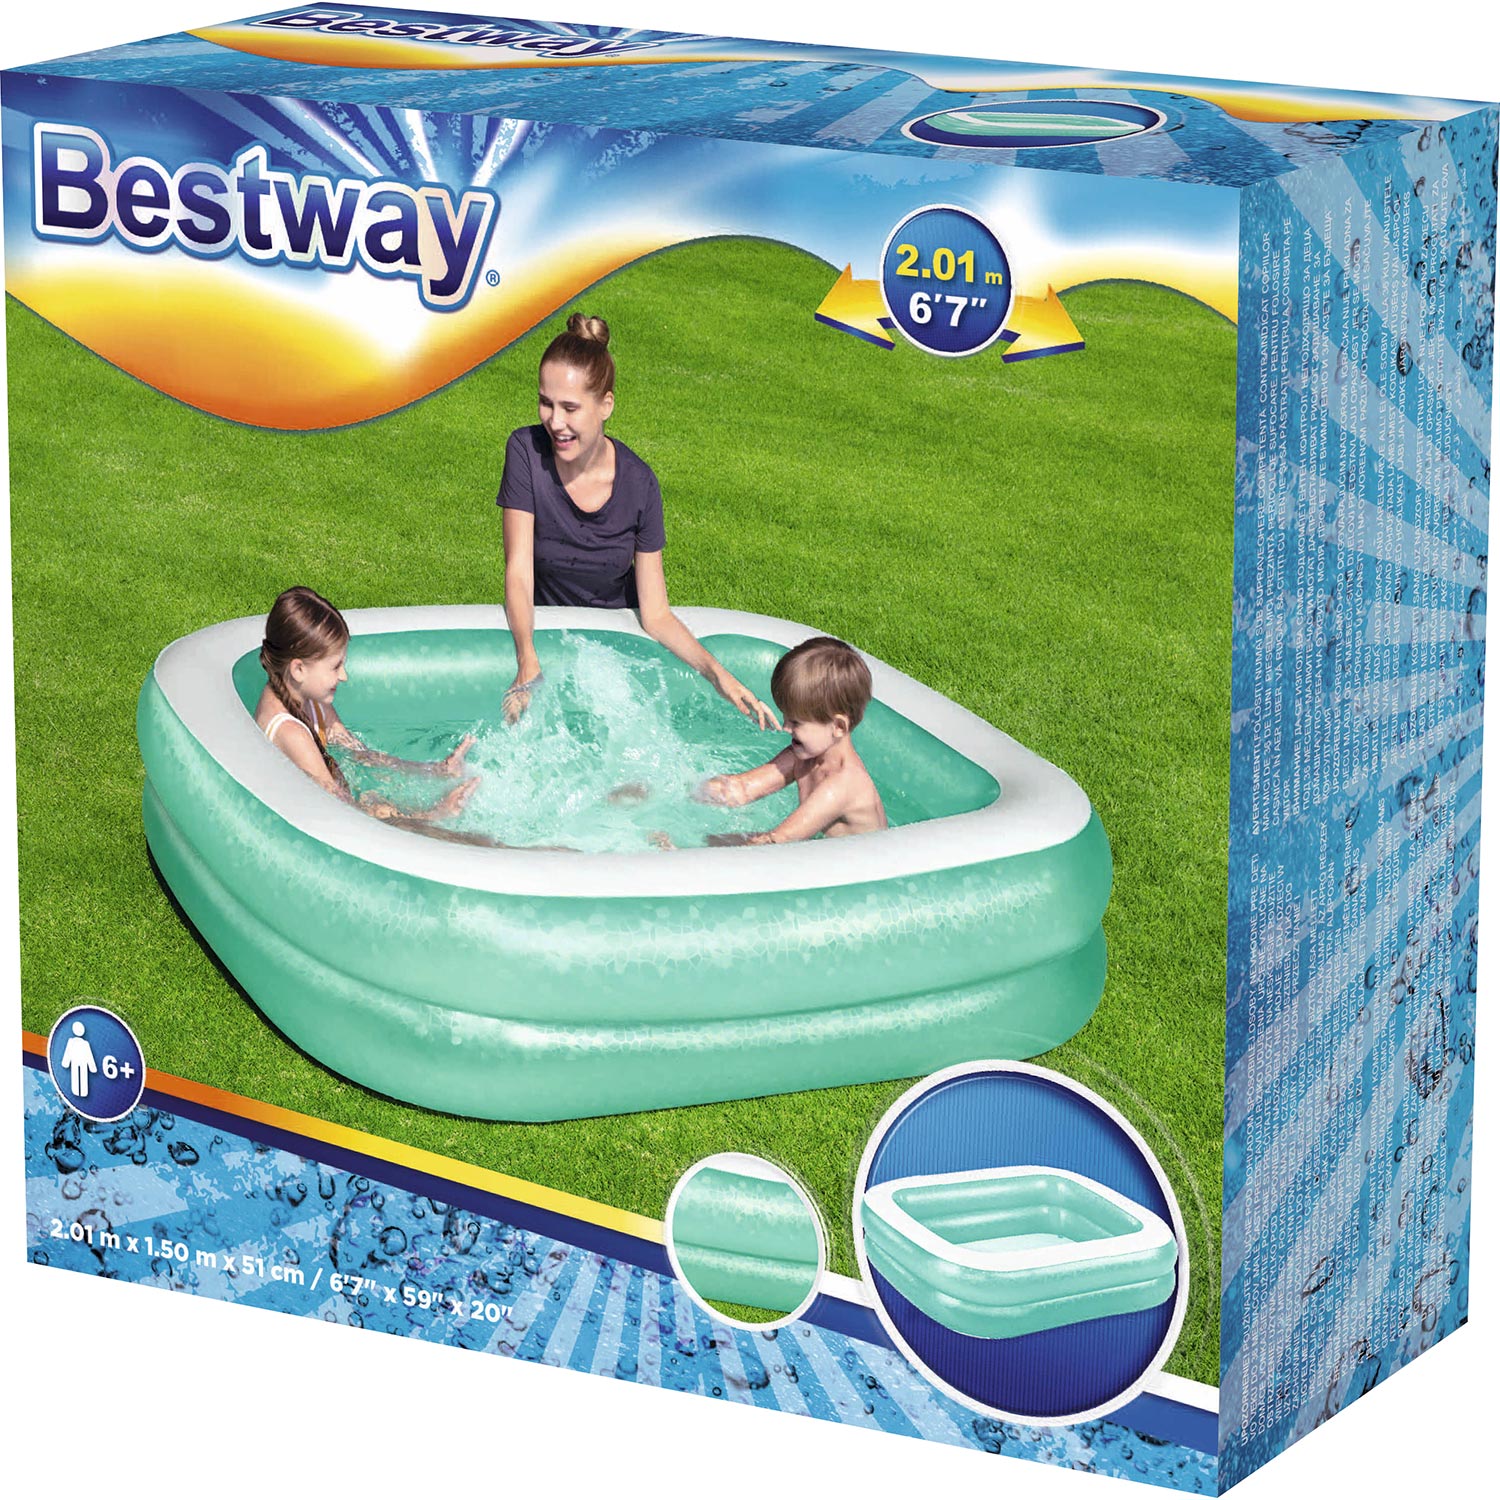 Bestway inflatable family pool 201 x 150 cm